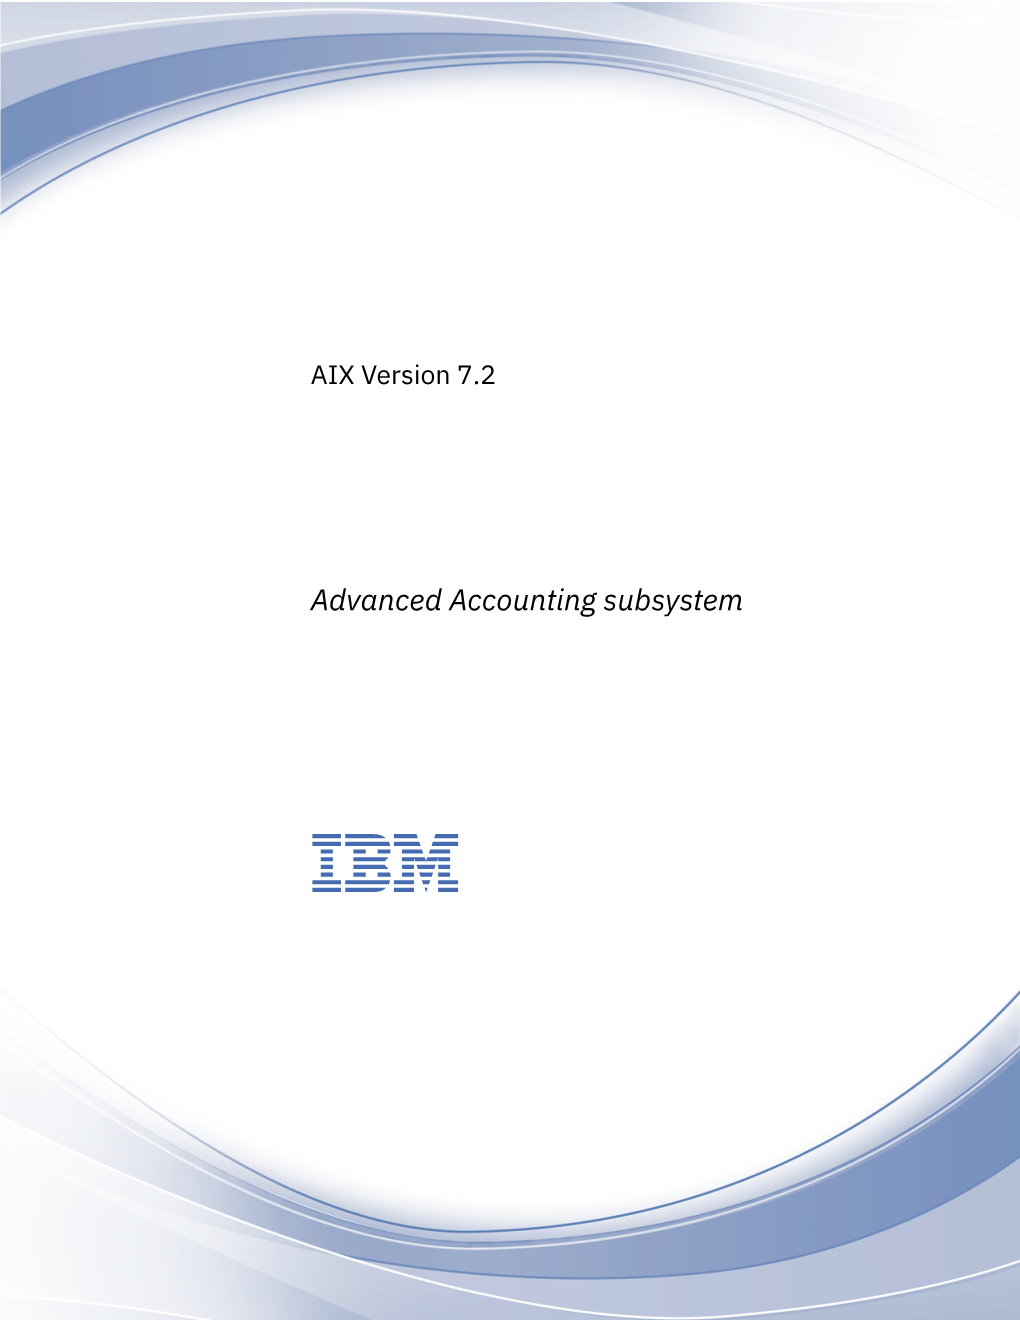 AIX Version 7.2: Advanced Accounting Subsystem Advanced Accounting Subsystem